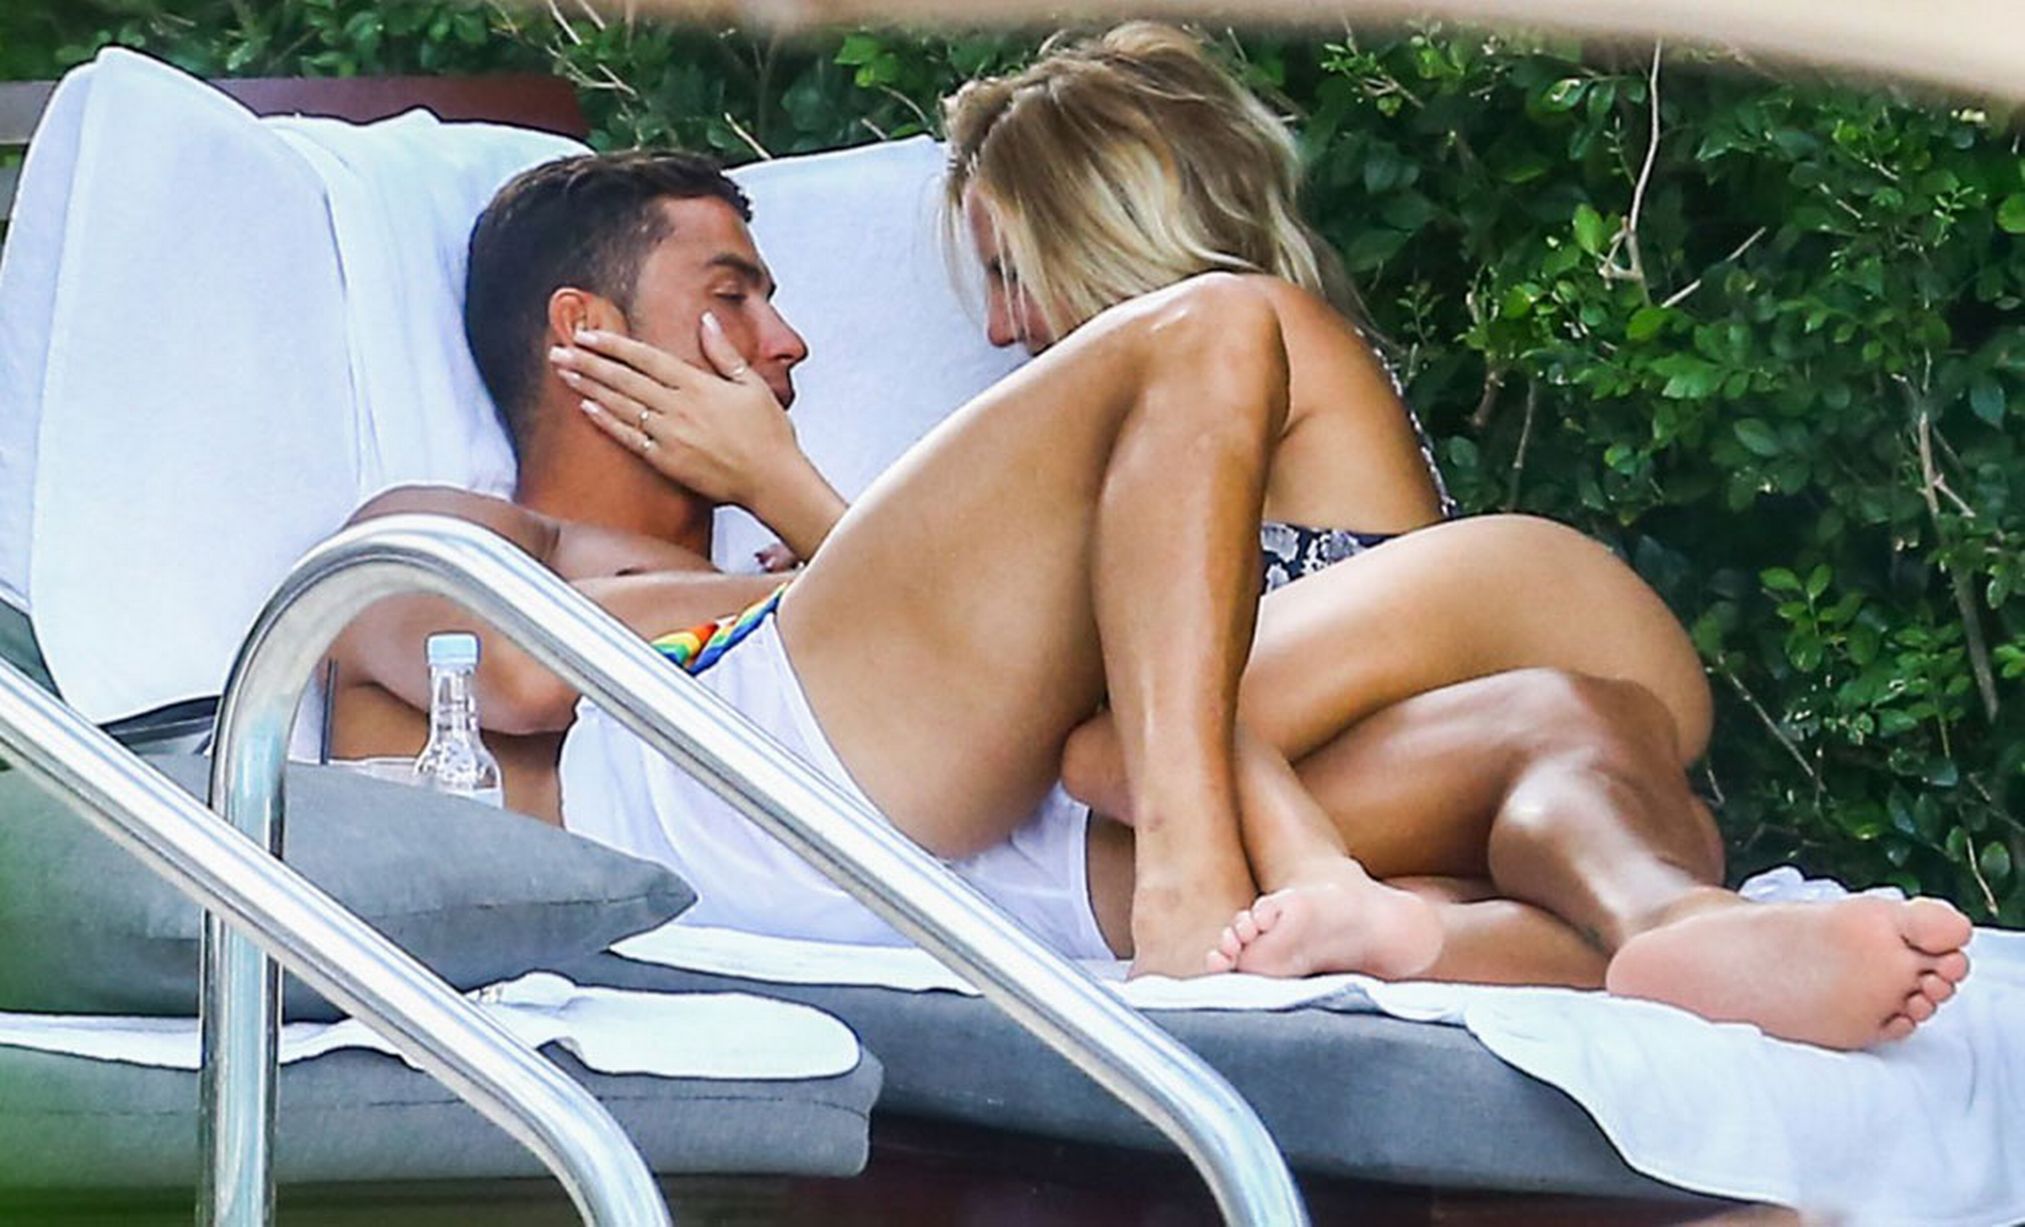 PAY-Cristiano-Ronaldo-is-spotted-getting-very-close-and-personal-with-Cassandra-Davis (7)